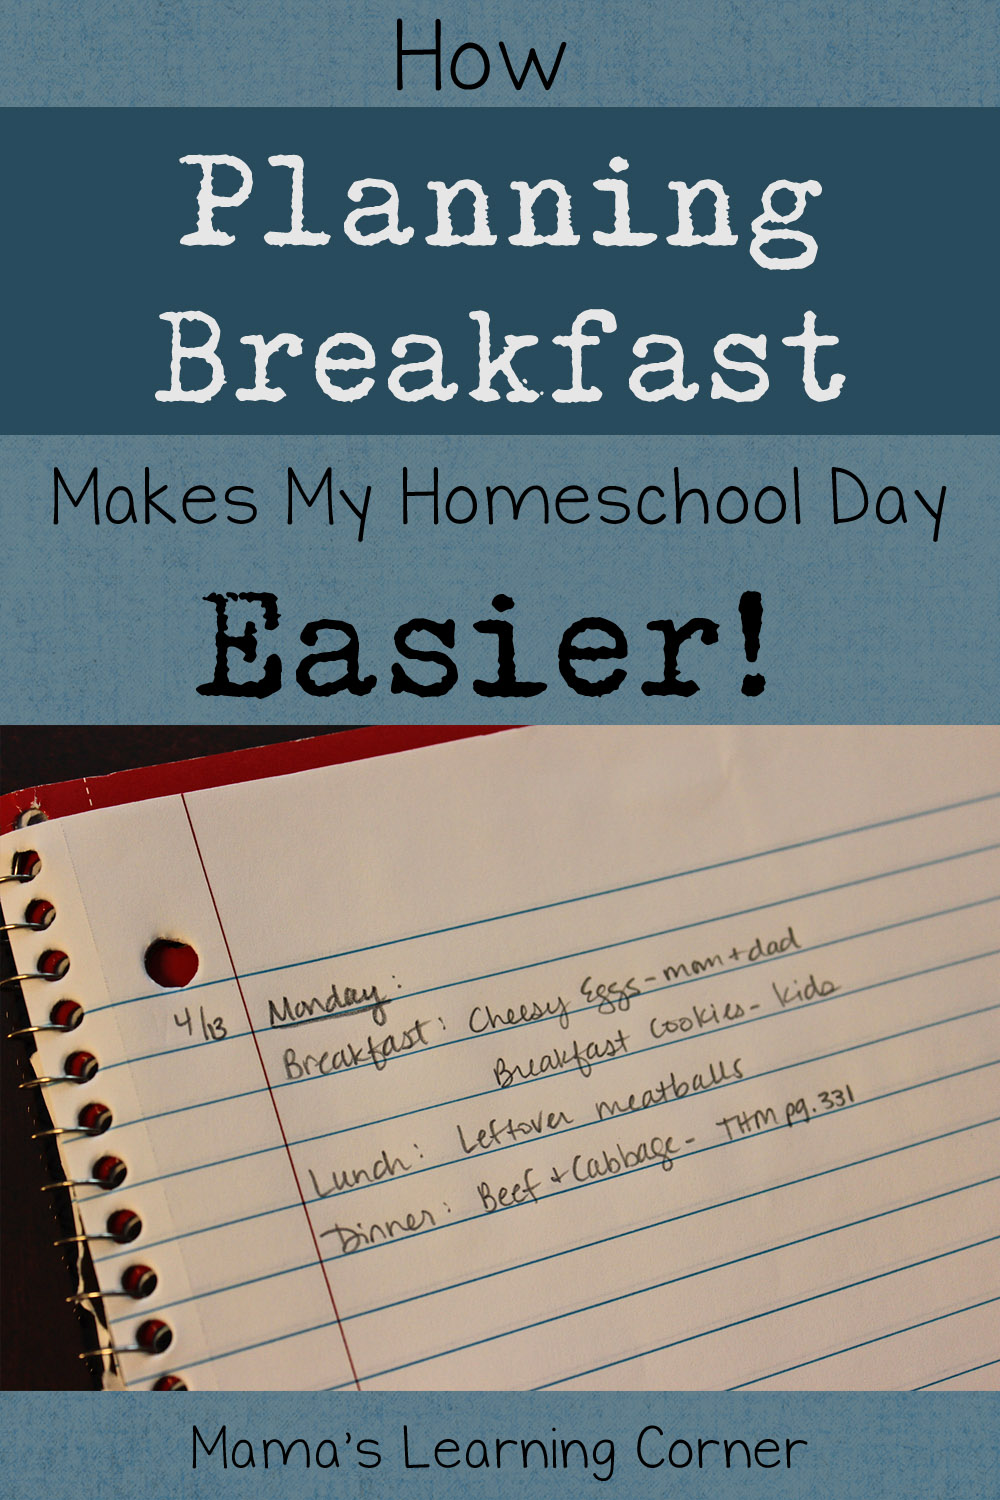 How Meal Planning Breakfast Makes My Homeschool Day Easier plus tips and ideas!